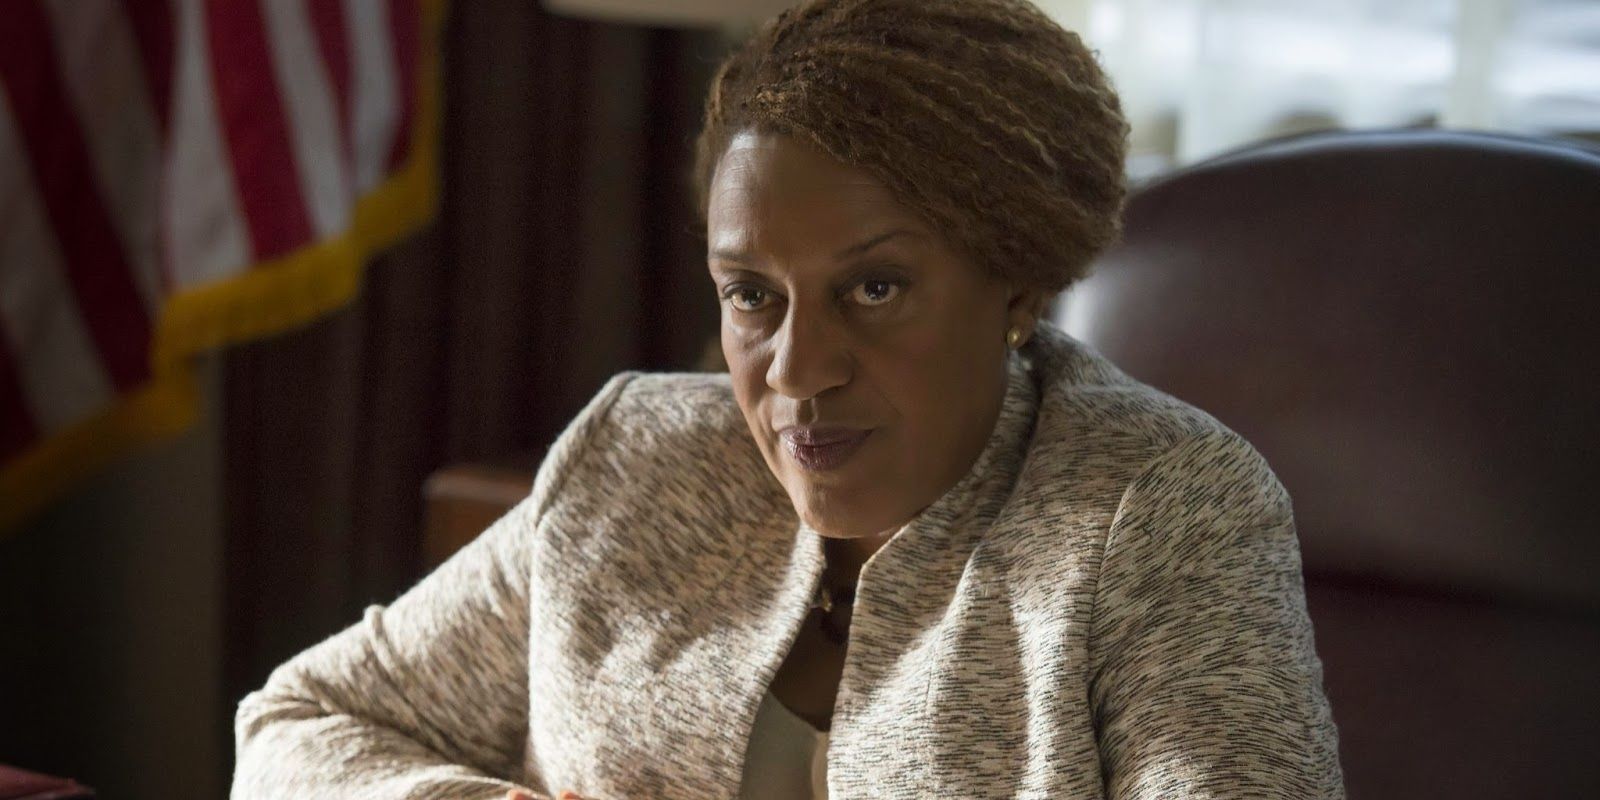 DA Tyne Patterson makes a deal with Jax in Sons of Anarchy